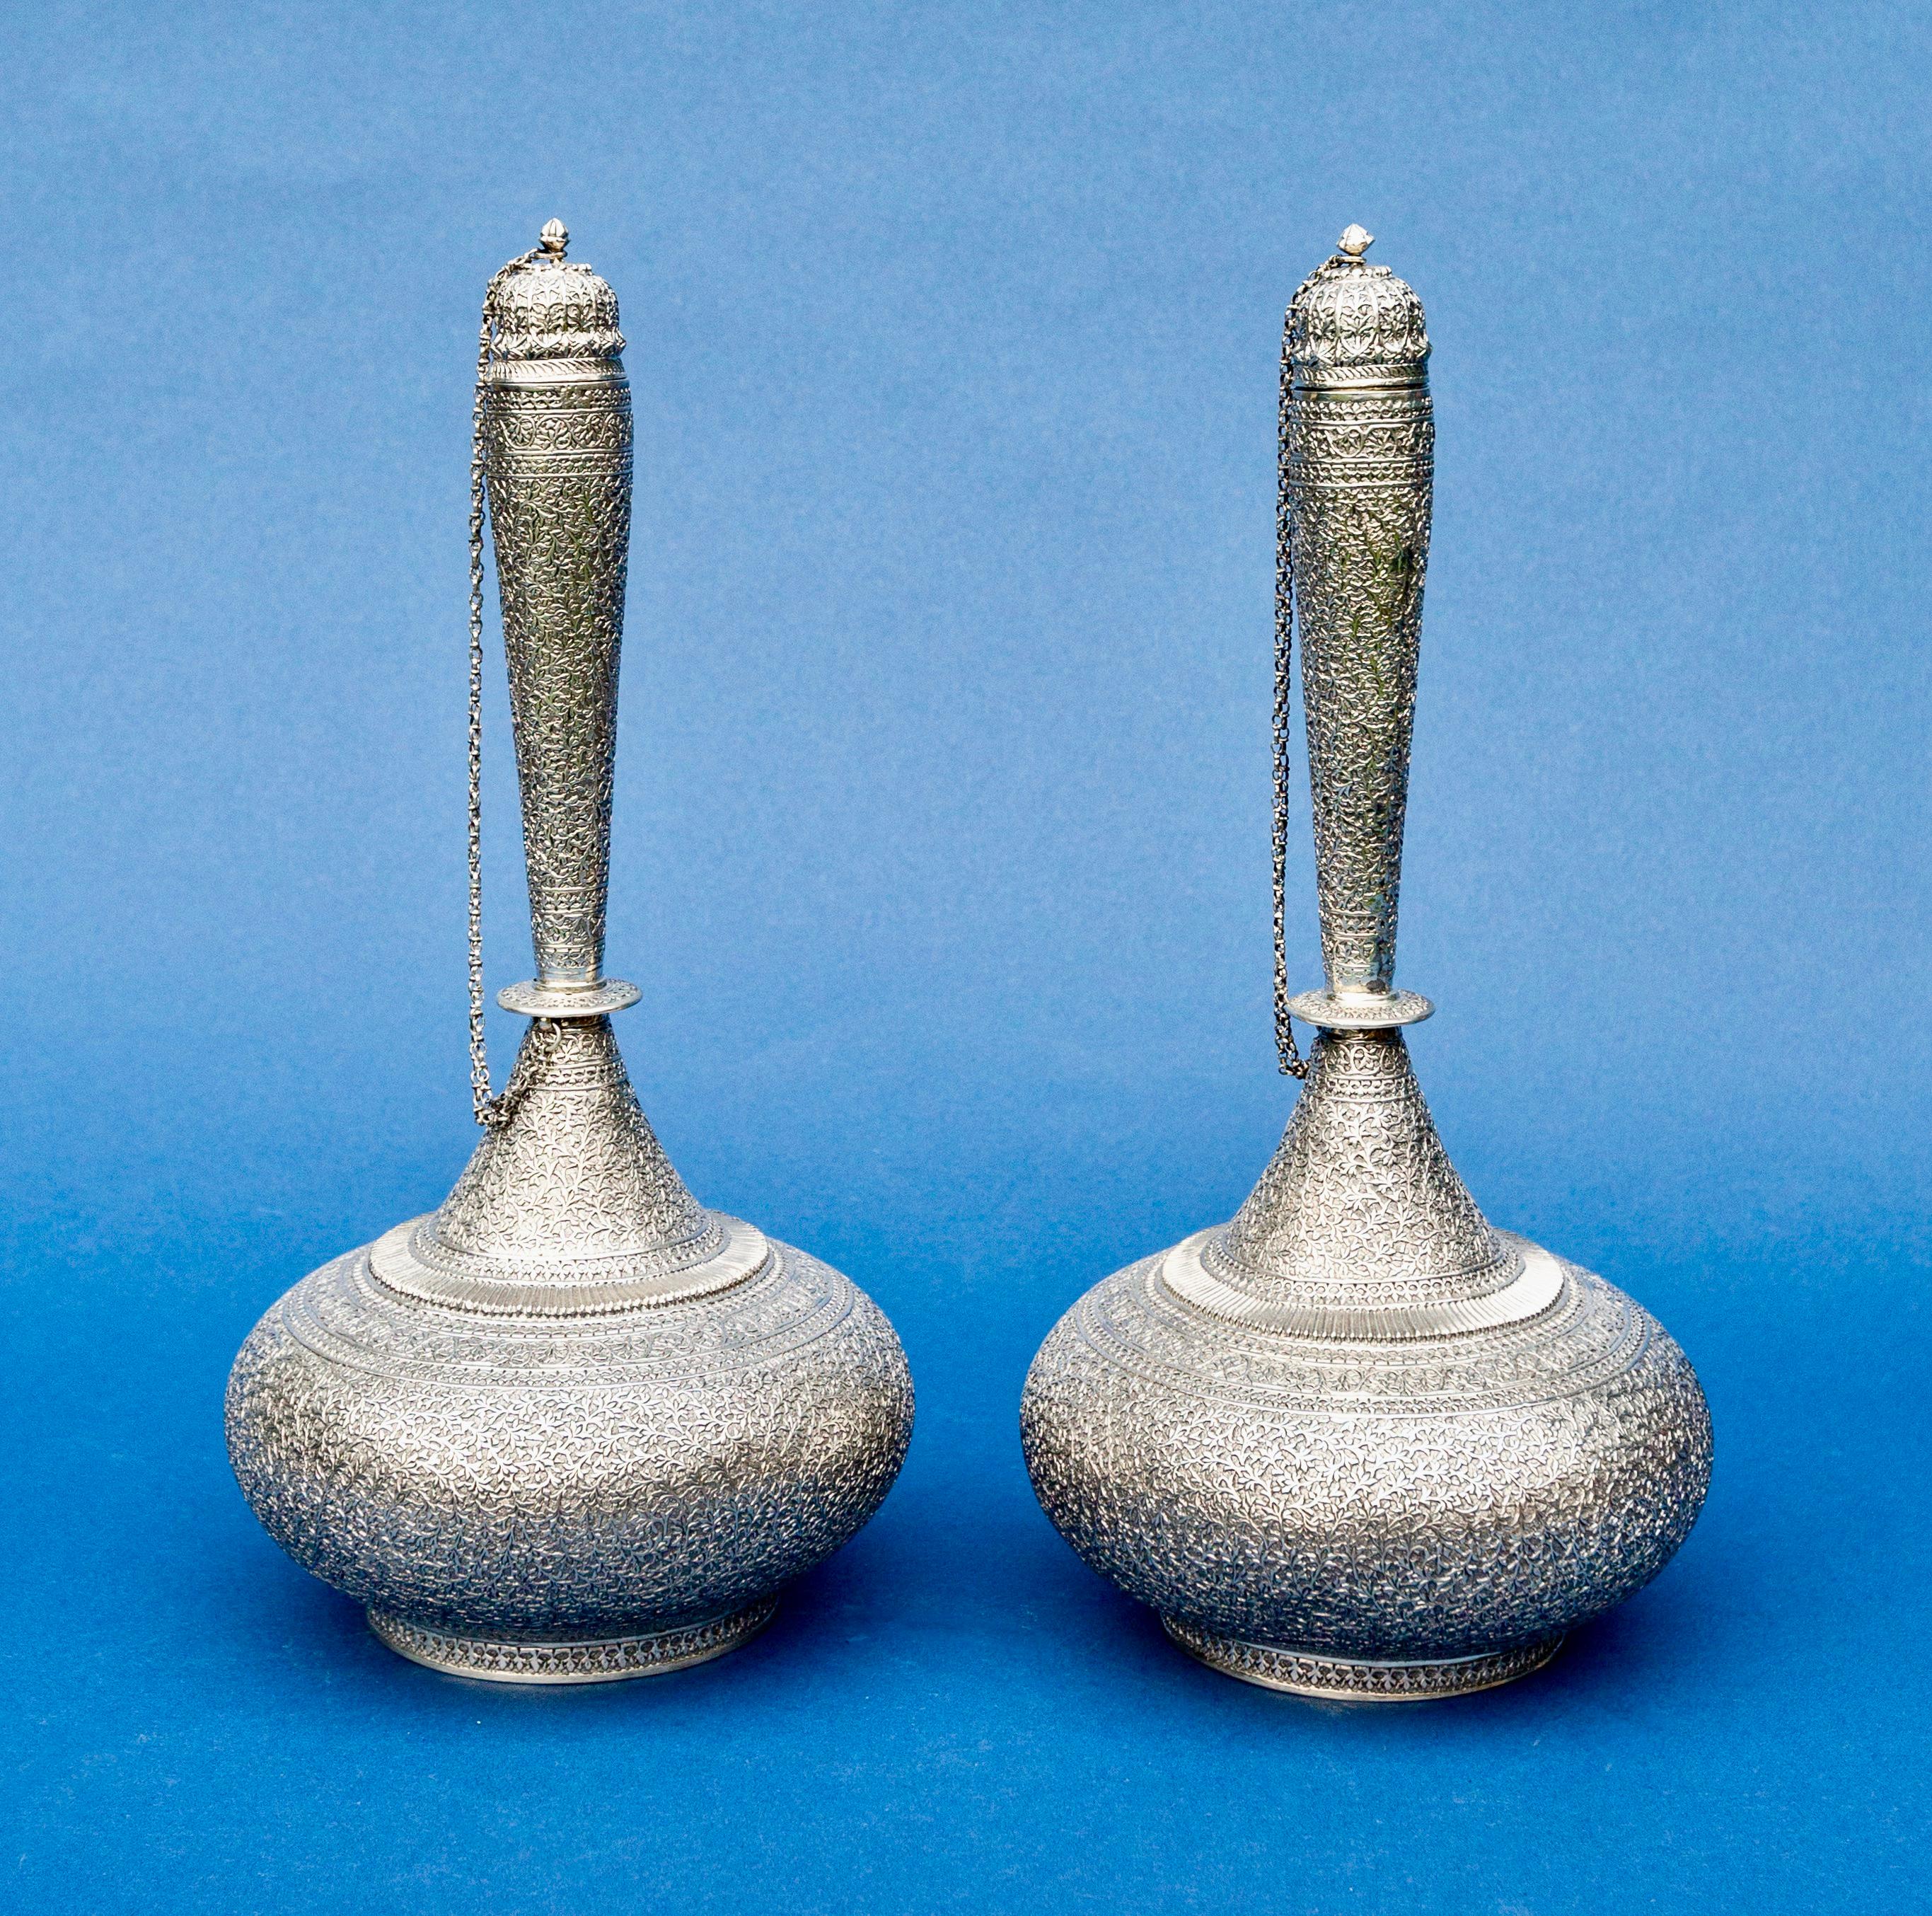 Pair of Indian silver rosewater bottles each with chained domed cover.